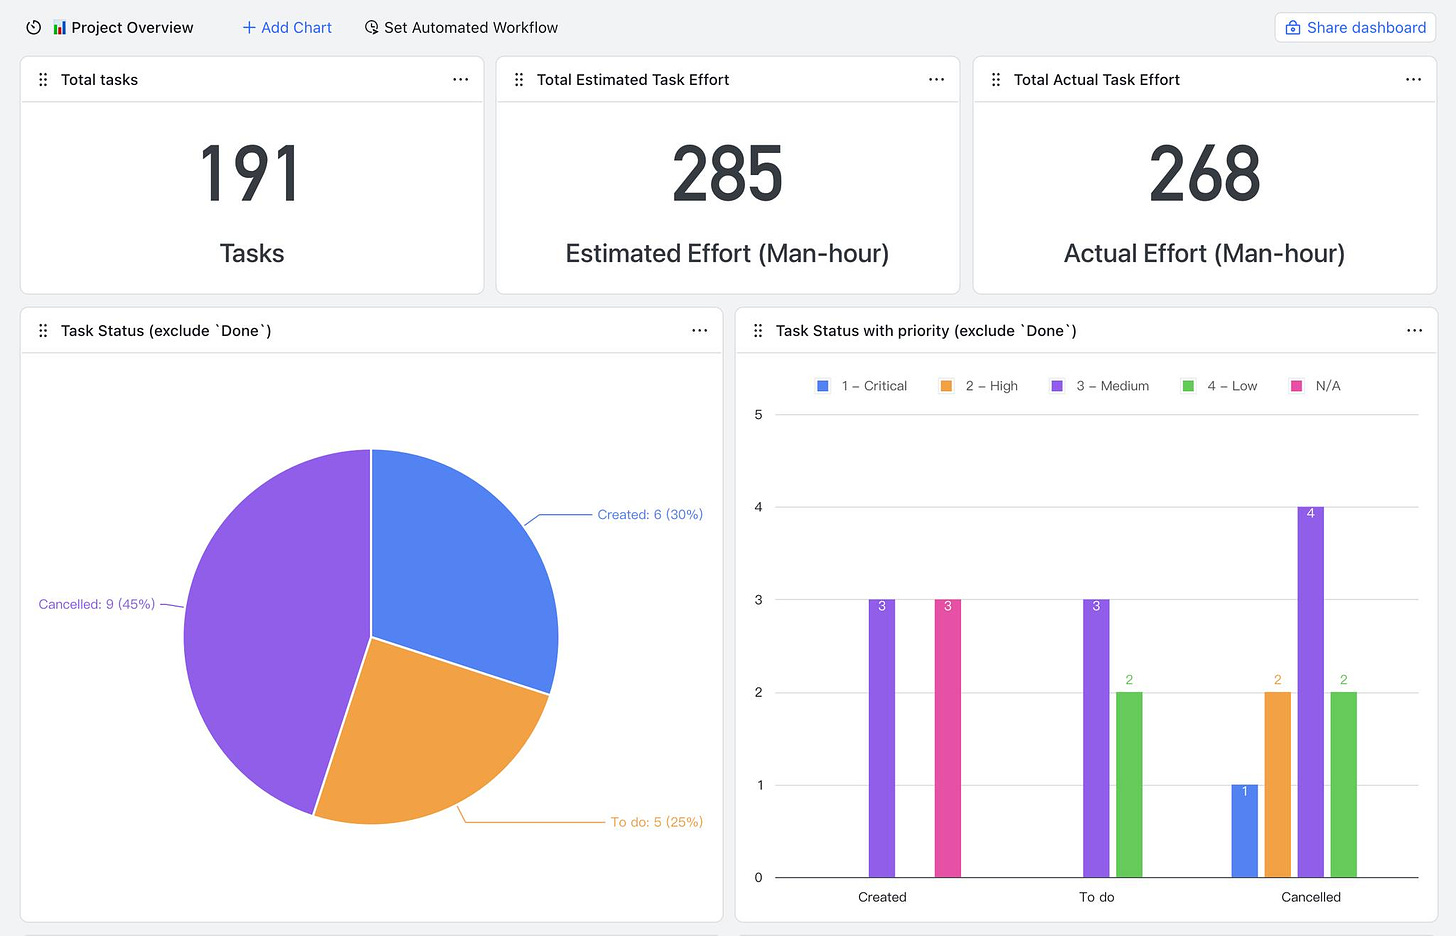 Có thể là hình ảnh về văn bản cho biết ': Project Overview Add Chart Total tasks SetAutomatedWorflow Workflow Total Estimated Task Effort 191 Total Actual Task Effort Share dashboard Tasks 285 Task Status (exclude Done') Estimated Effort (Man-hour) 268 Actual Effort (Man-hour) Task Status with priority (exclude Done') 1-Criticl -High -Medium Cancelled: (45%) 4-Low Created: 6(30%) N/A (25%) Created Todo Cancelled'